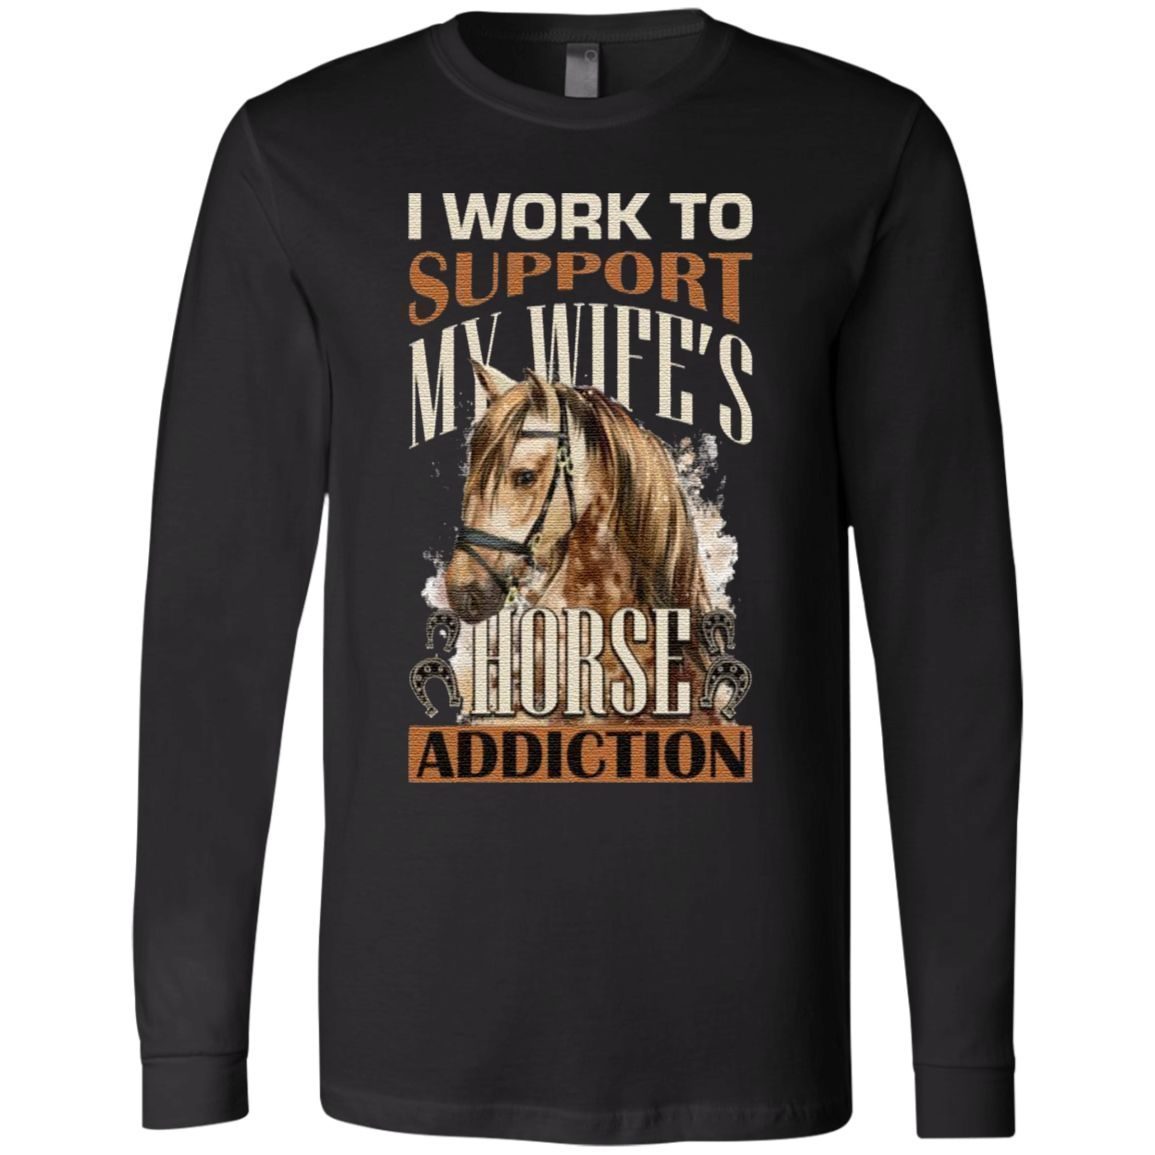 I Work to Support My Wife’s Horse Addiction T-Shirt